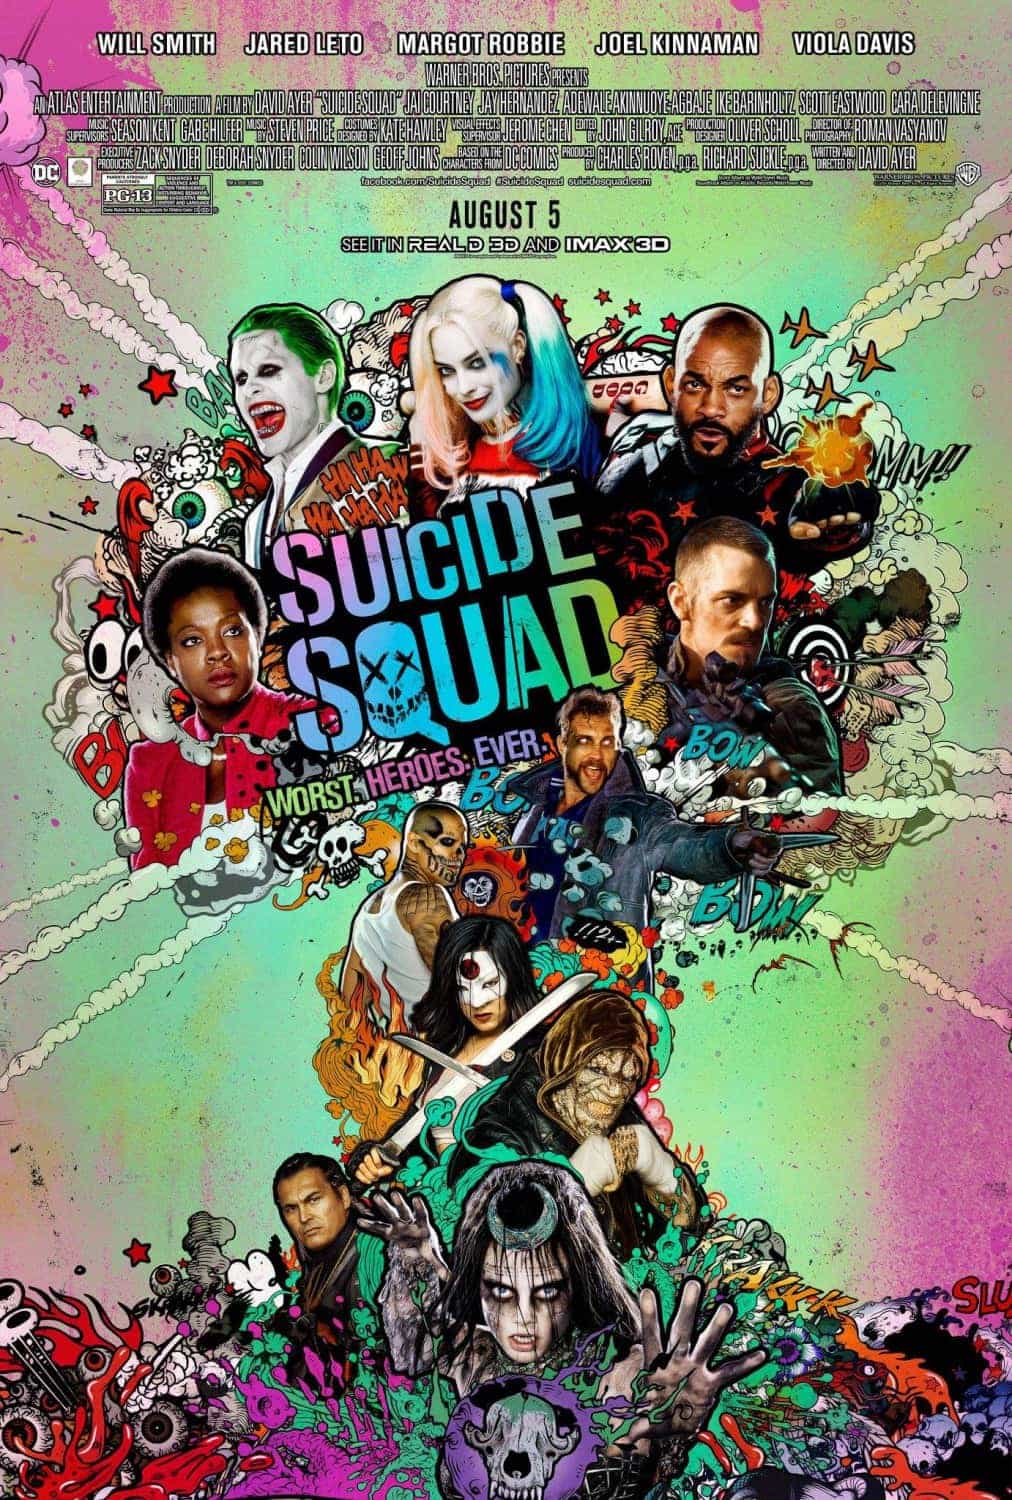 US Box Office Weekend Report 12th - 14th August 2016:  Suicide Squad keeps Sausages and dragons at bay